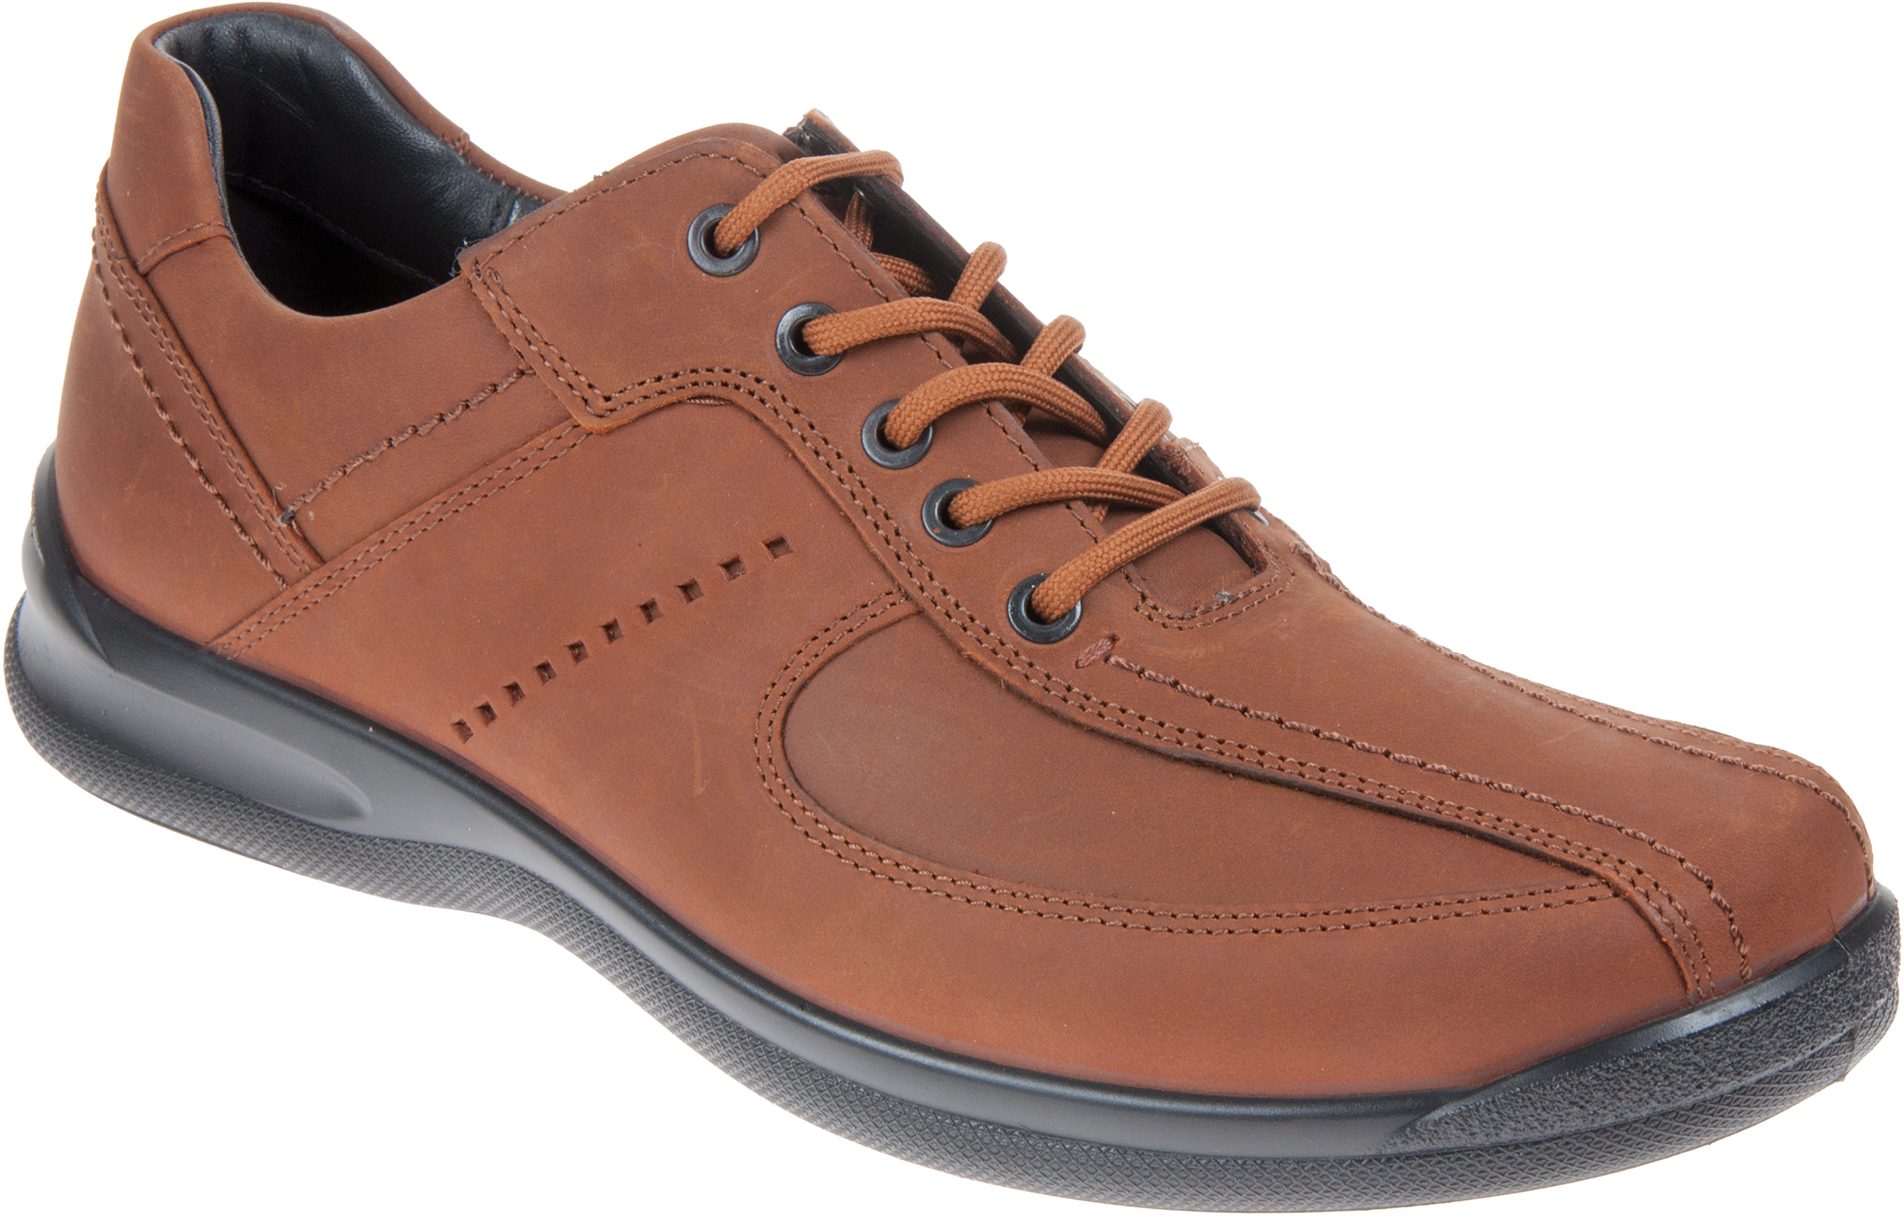 Hotter Lance Tan Waxed Nubuck - Casual Shoes - Humphries Shoes